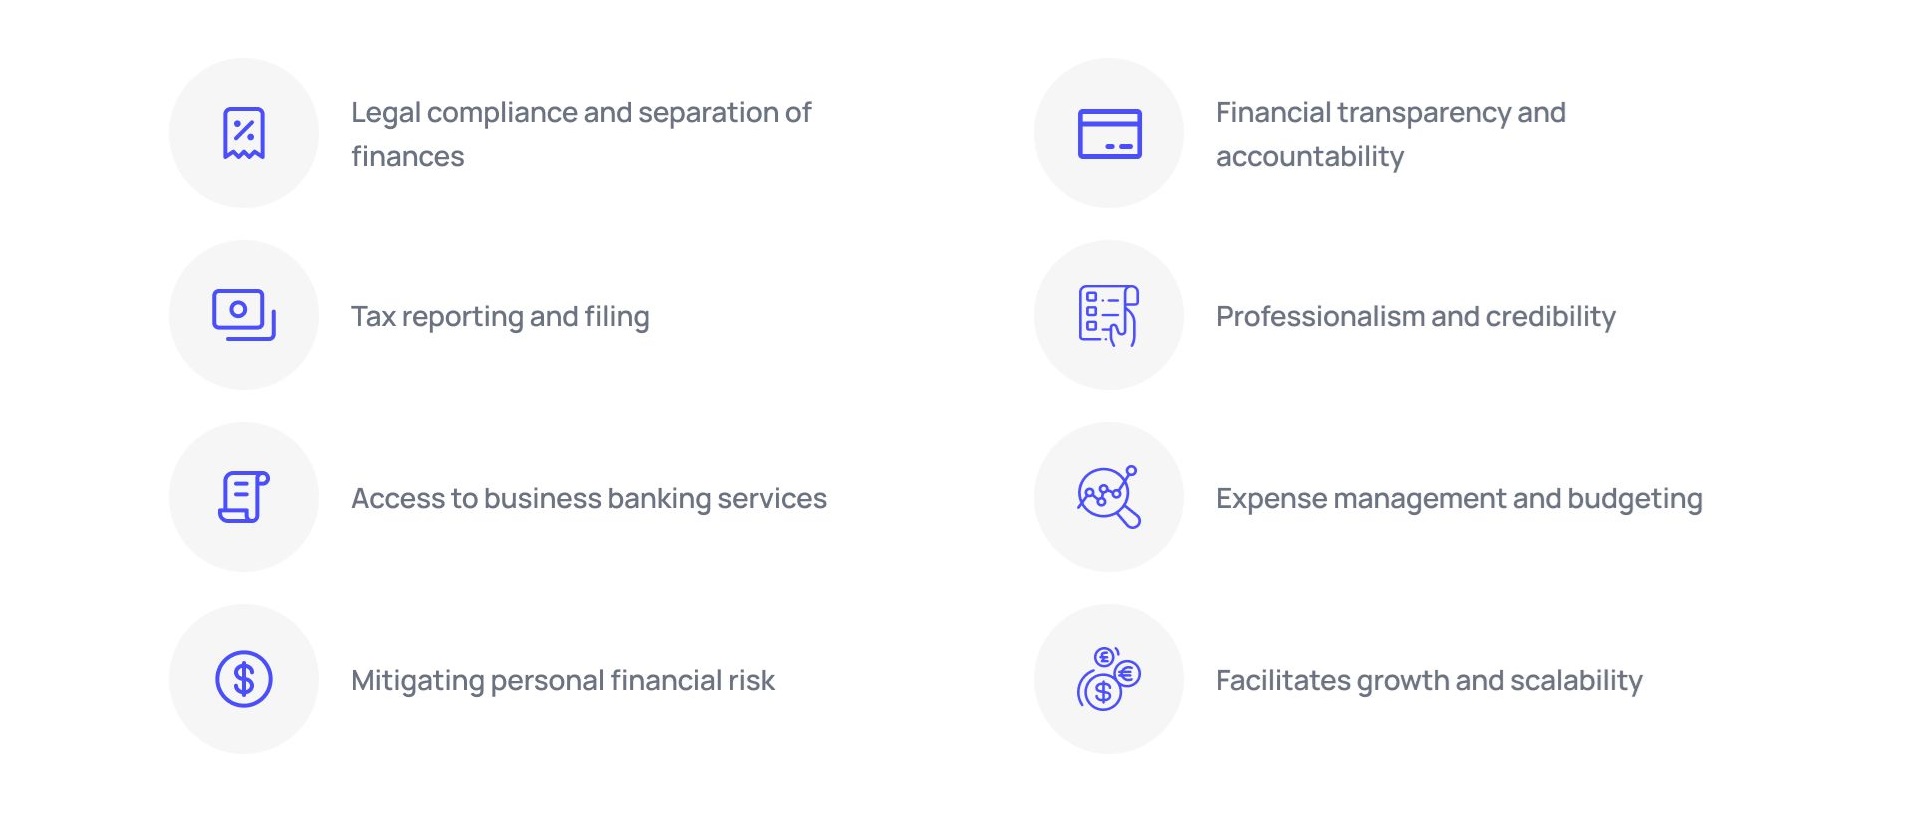 Business account - Factors to consider